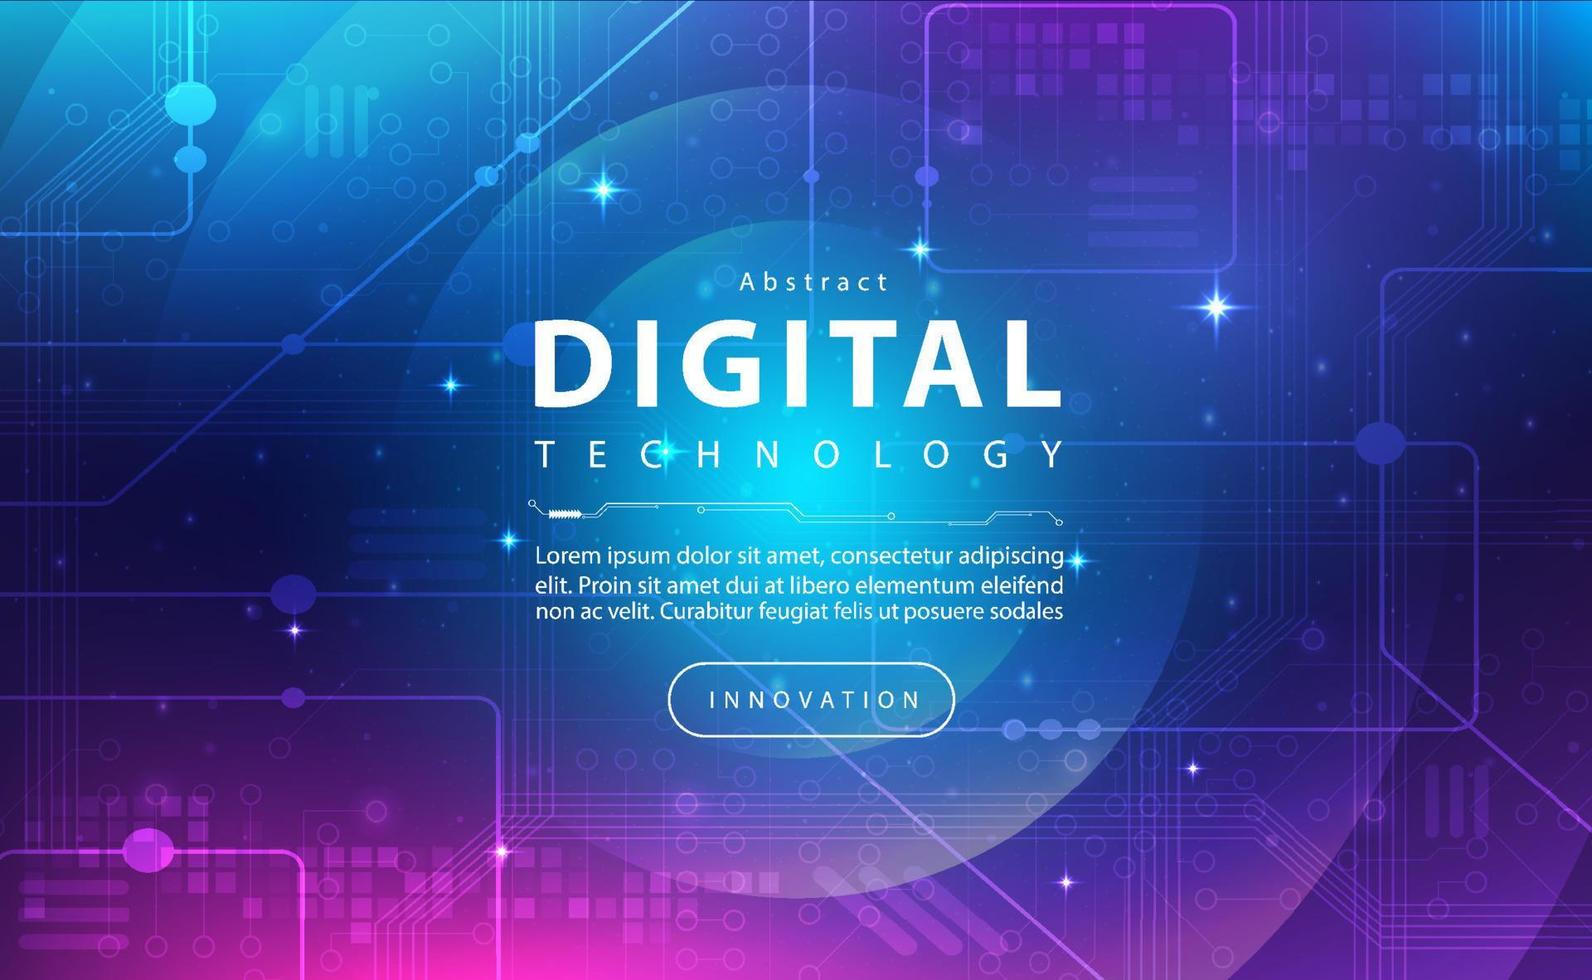 Digital technology banner blue pink background concept, cyber security technology, abstract purple tech, innovation future data, internet network, Ai big data, line dot connection, illustration vector